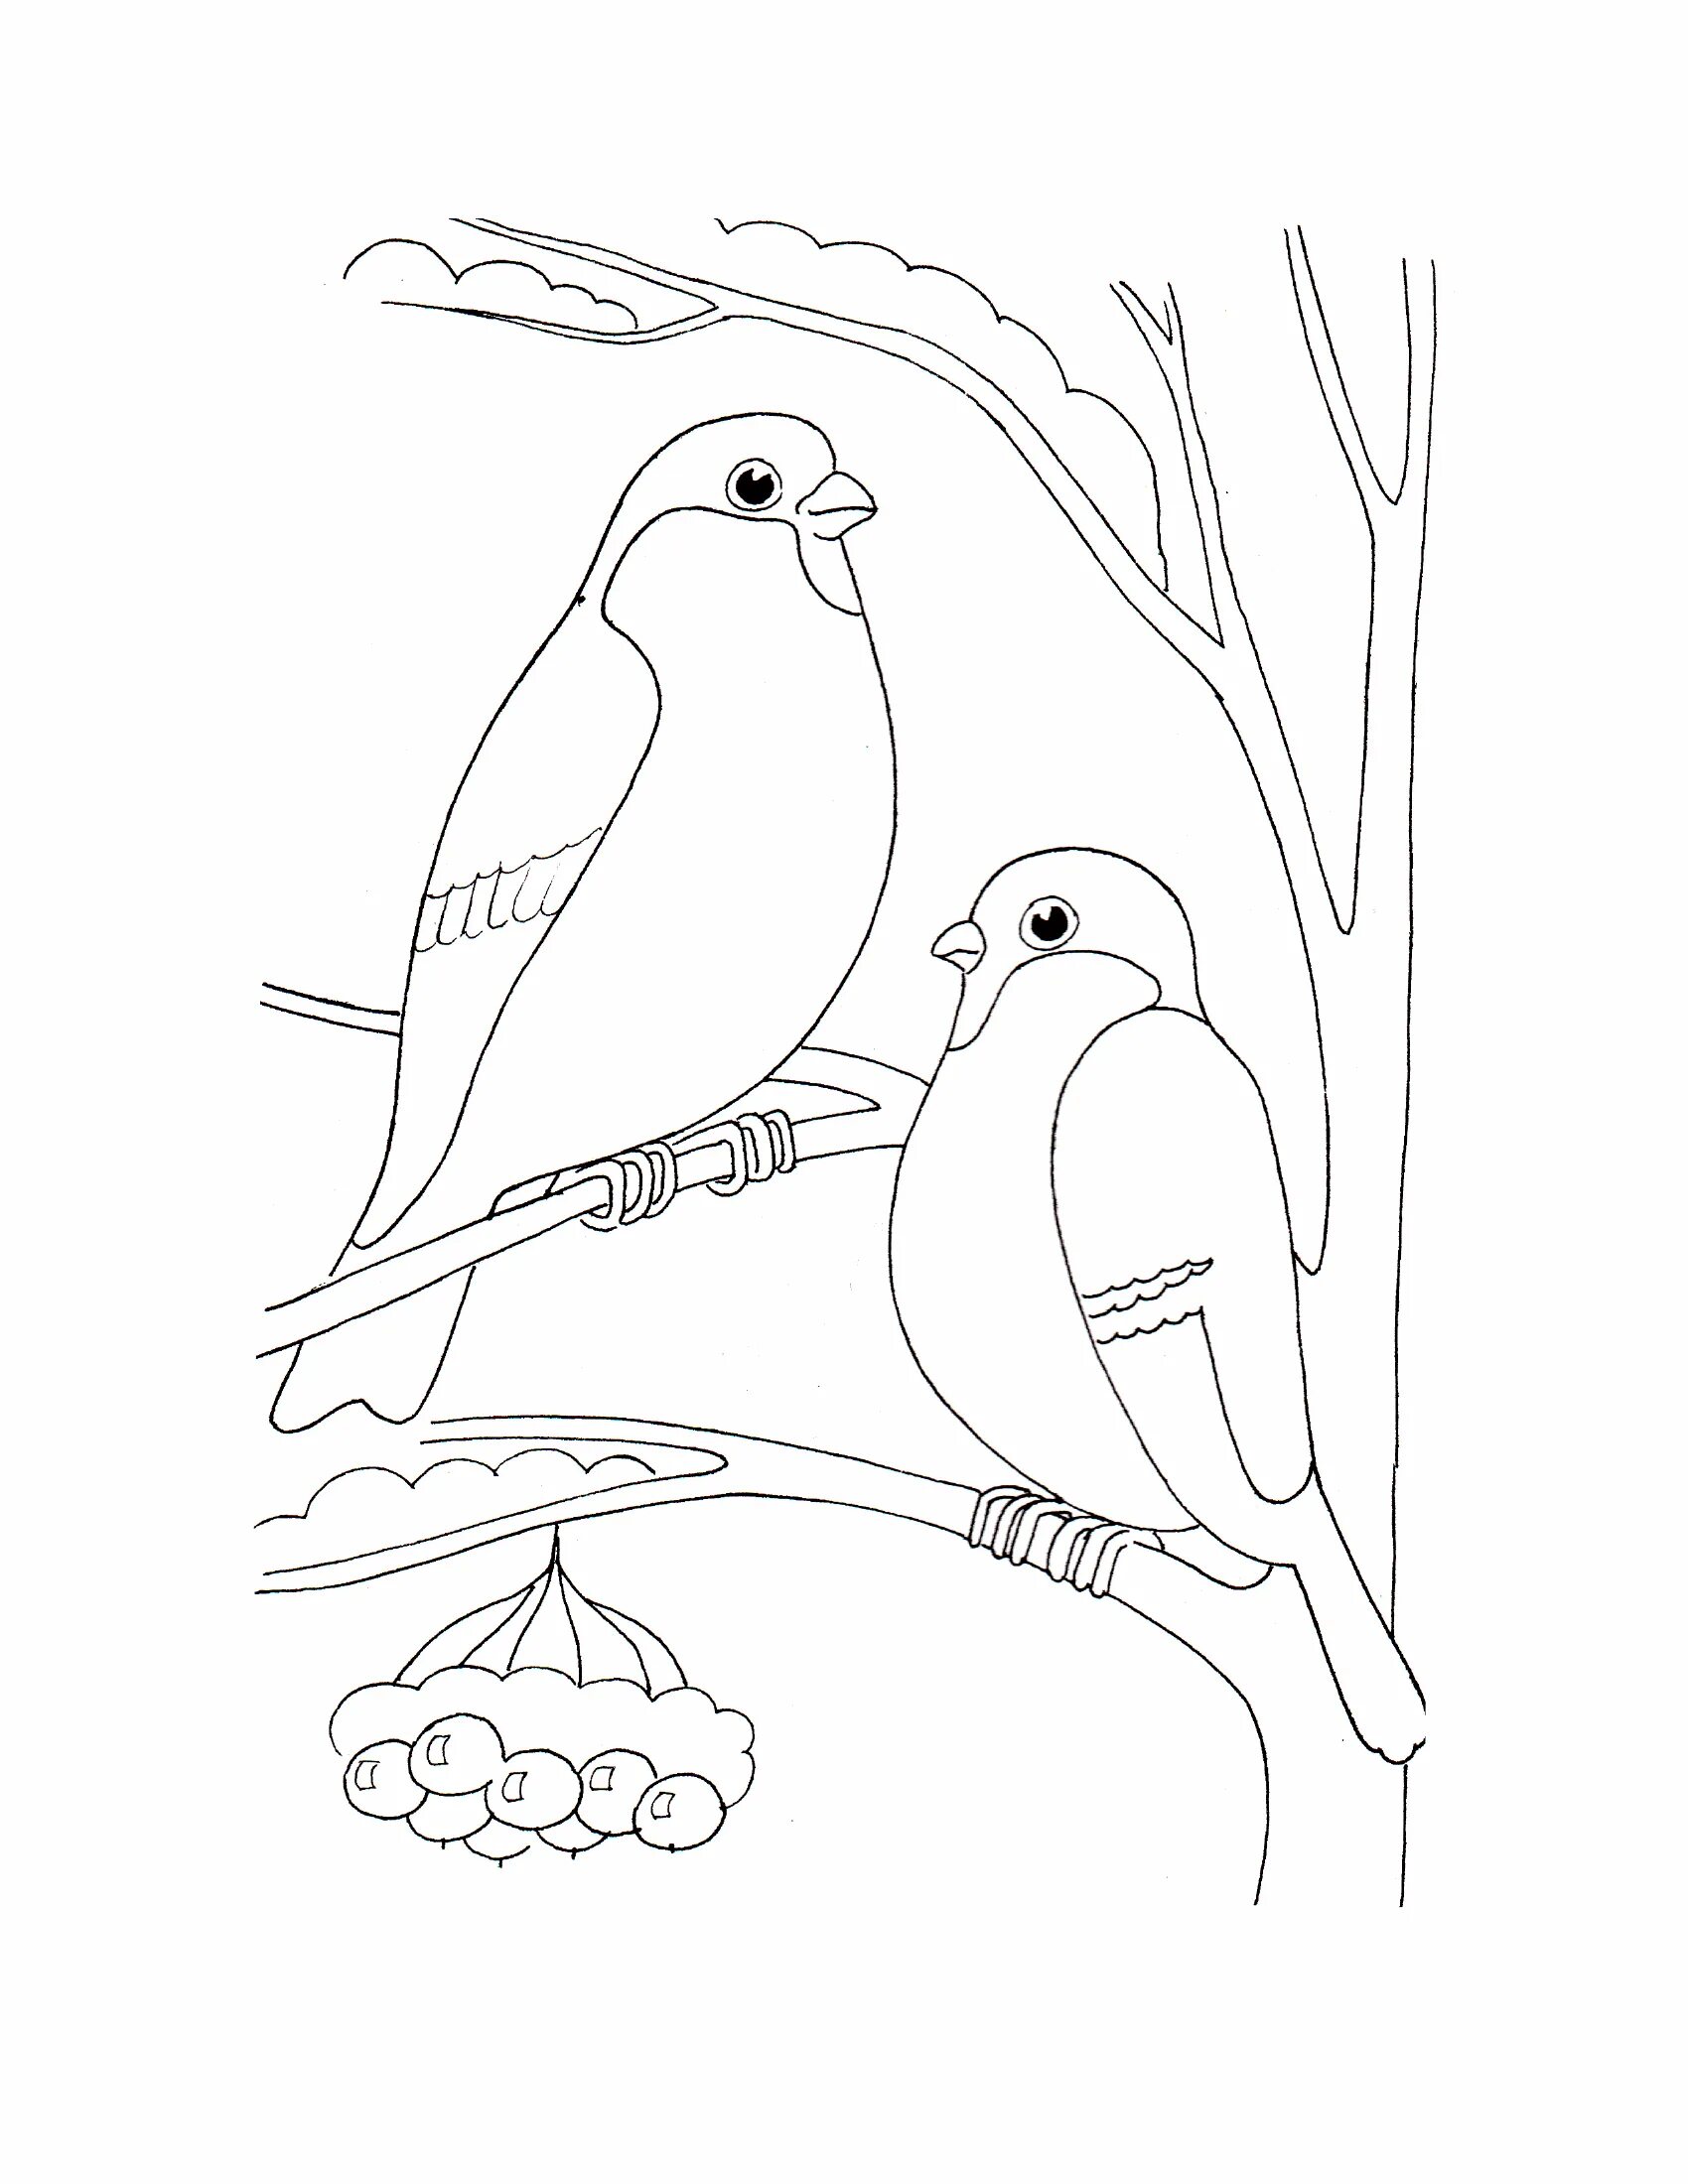 Coloring pages winter birds coloring pages for children 3-4 years old